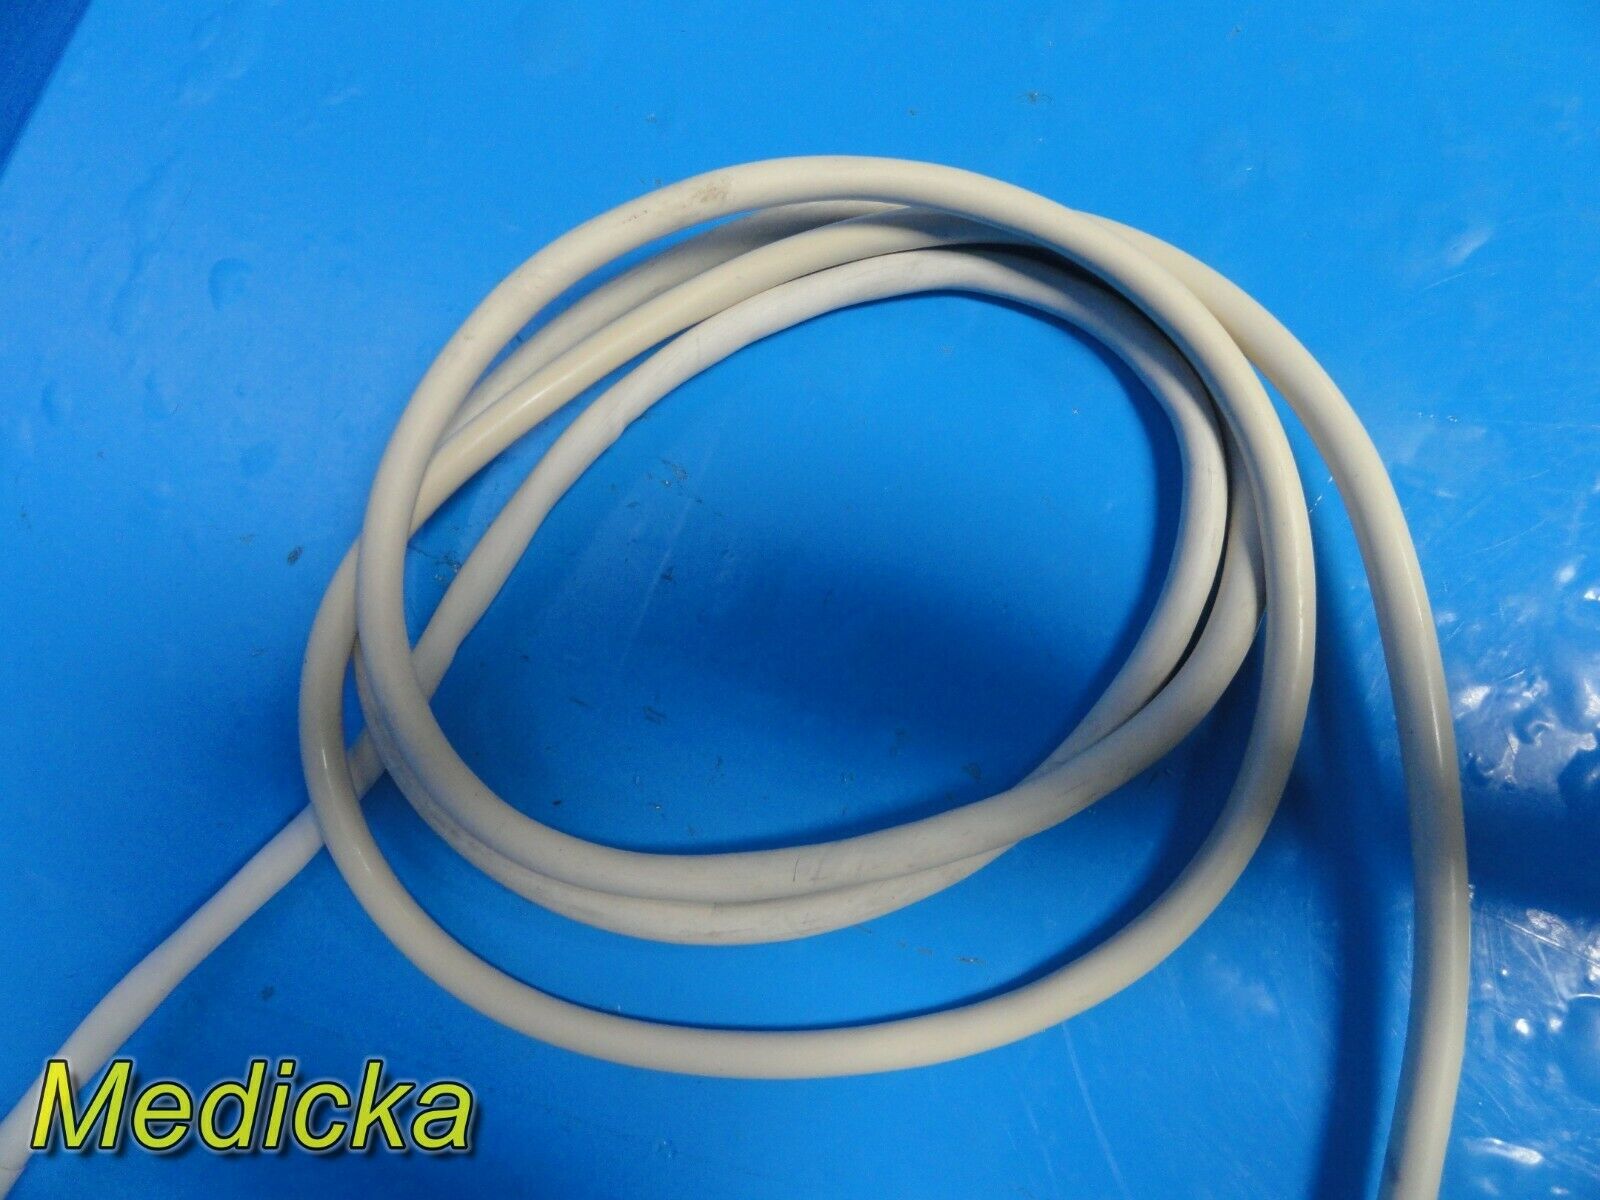 Philips C5-2 40R (4000-0574-06) Curved Array Ultrasound Transducer Probe ~ 21278 DIAGNOSTIC ULTRASOUND MACHINES FOR SALE